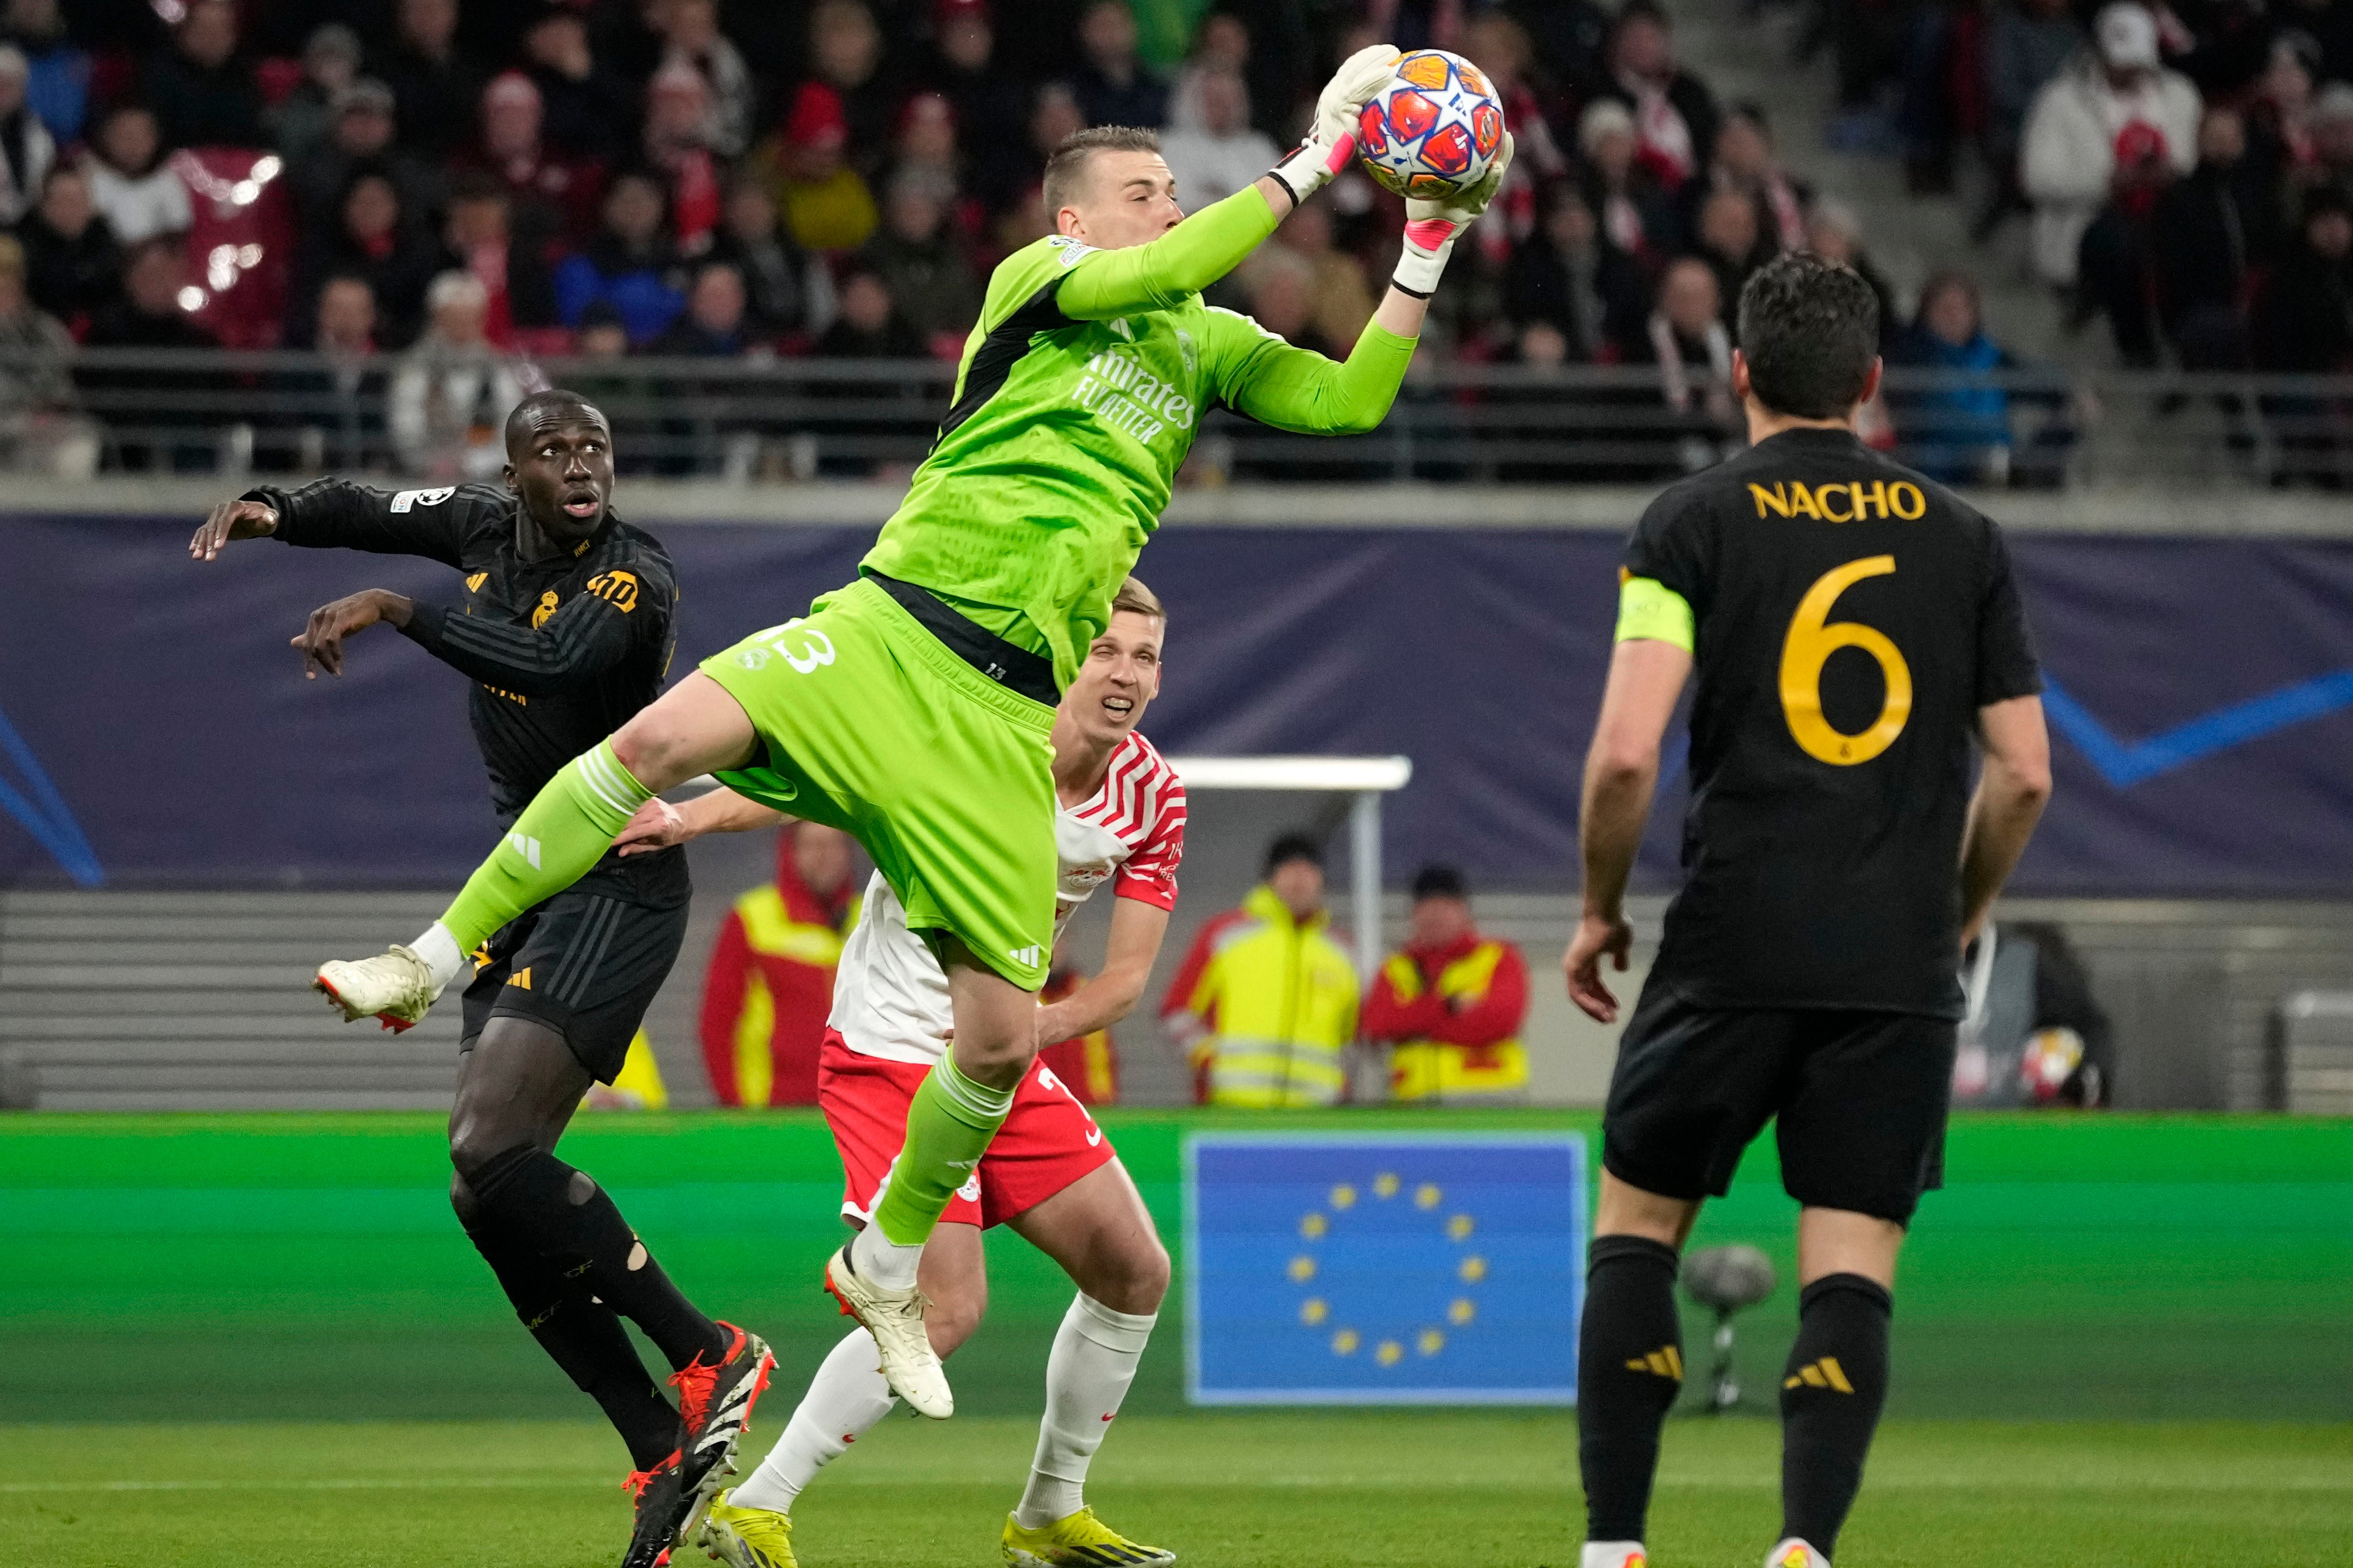 Andriy Lunin made some crucial saves to deny RB Leipzig a goal